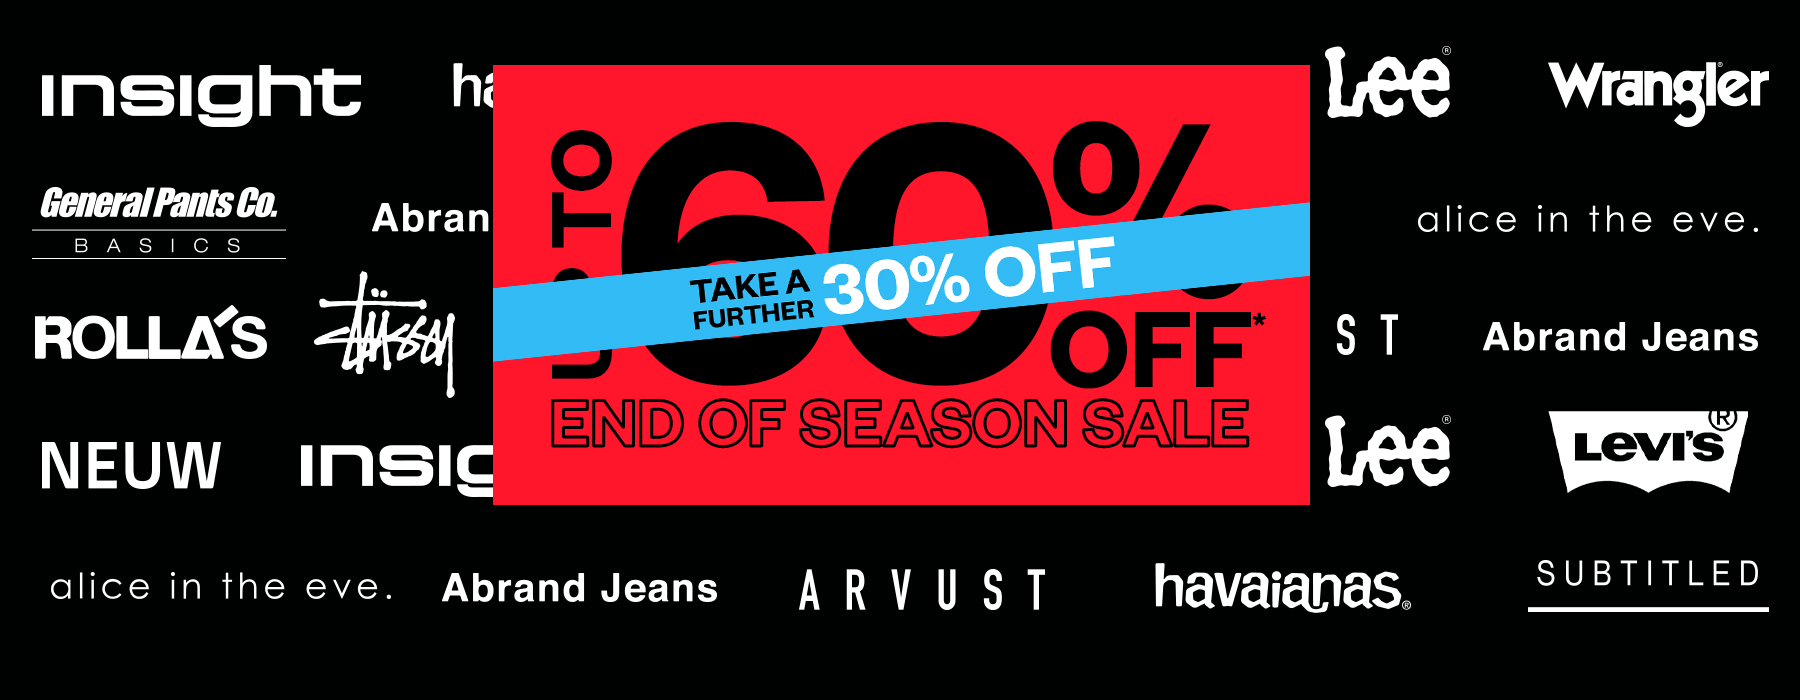 Up to 60% OFF + Further 30% OFF on End of Season sale styles @ General Pants